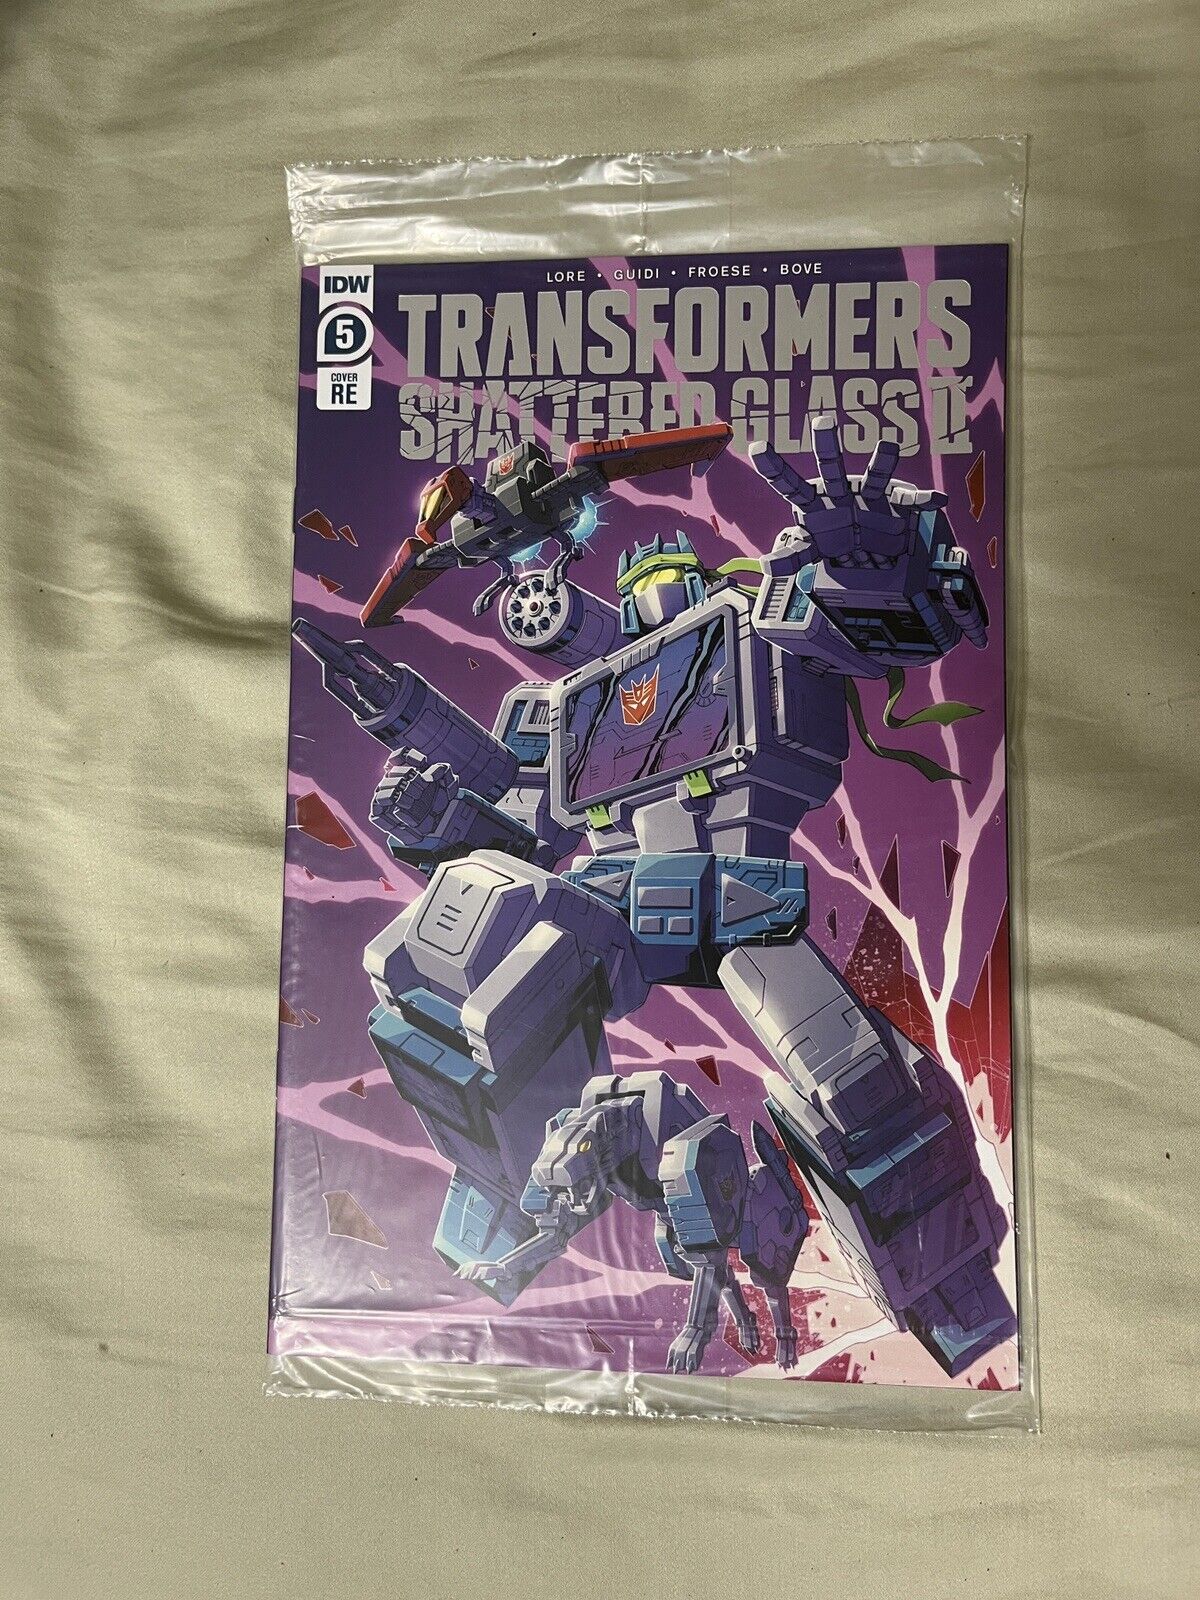 Transformers Shattered Glass II #5 RE IDW Hasbro Pulse Exclusive Read Comic